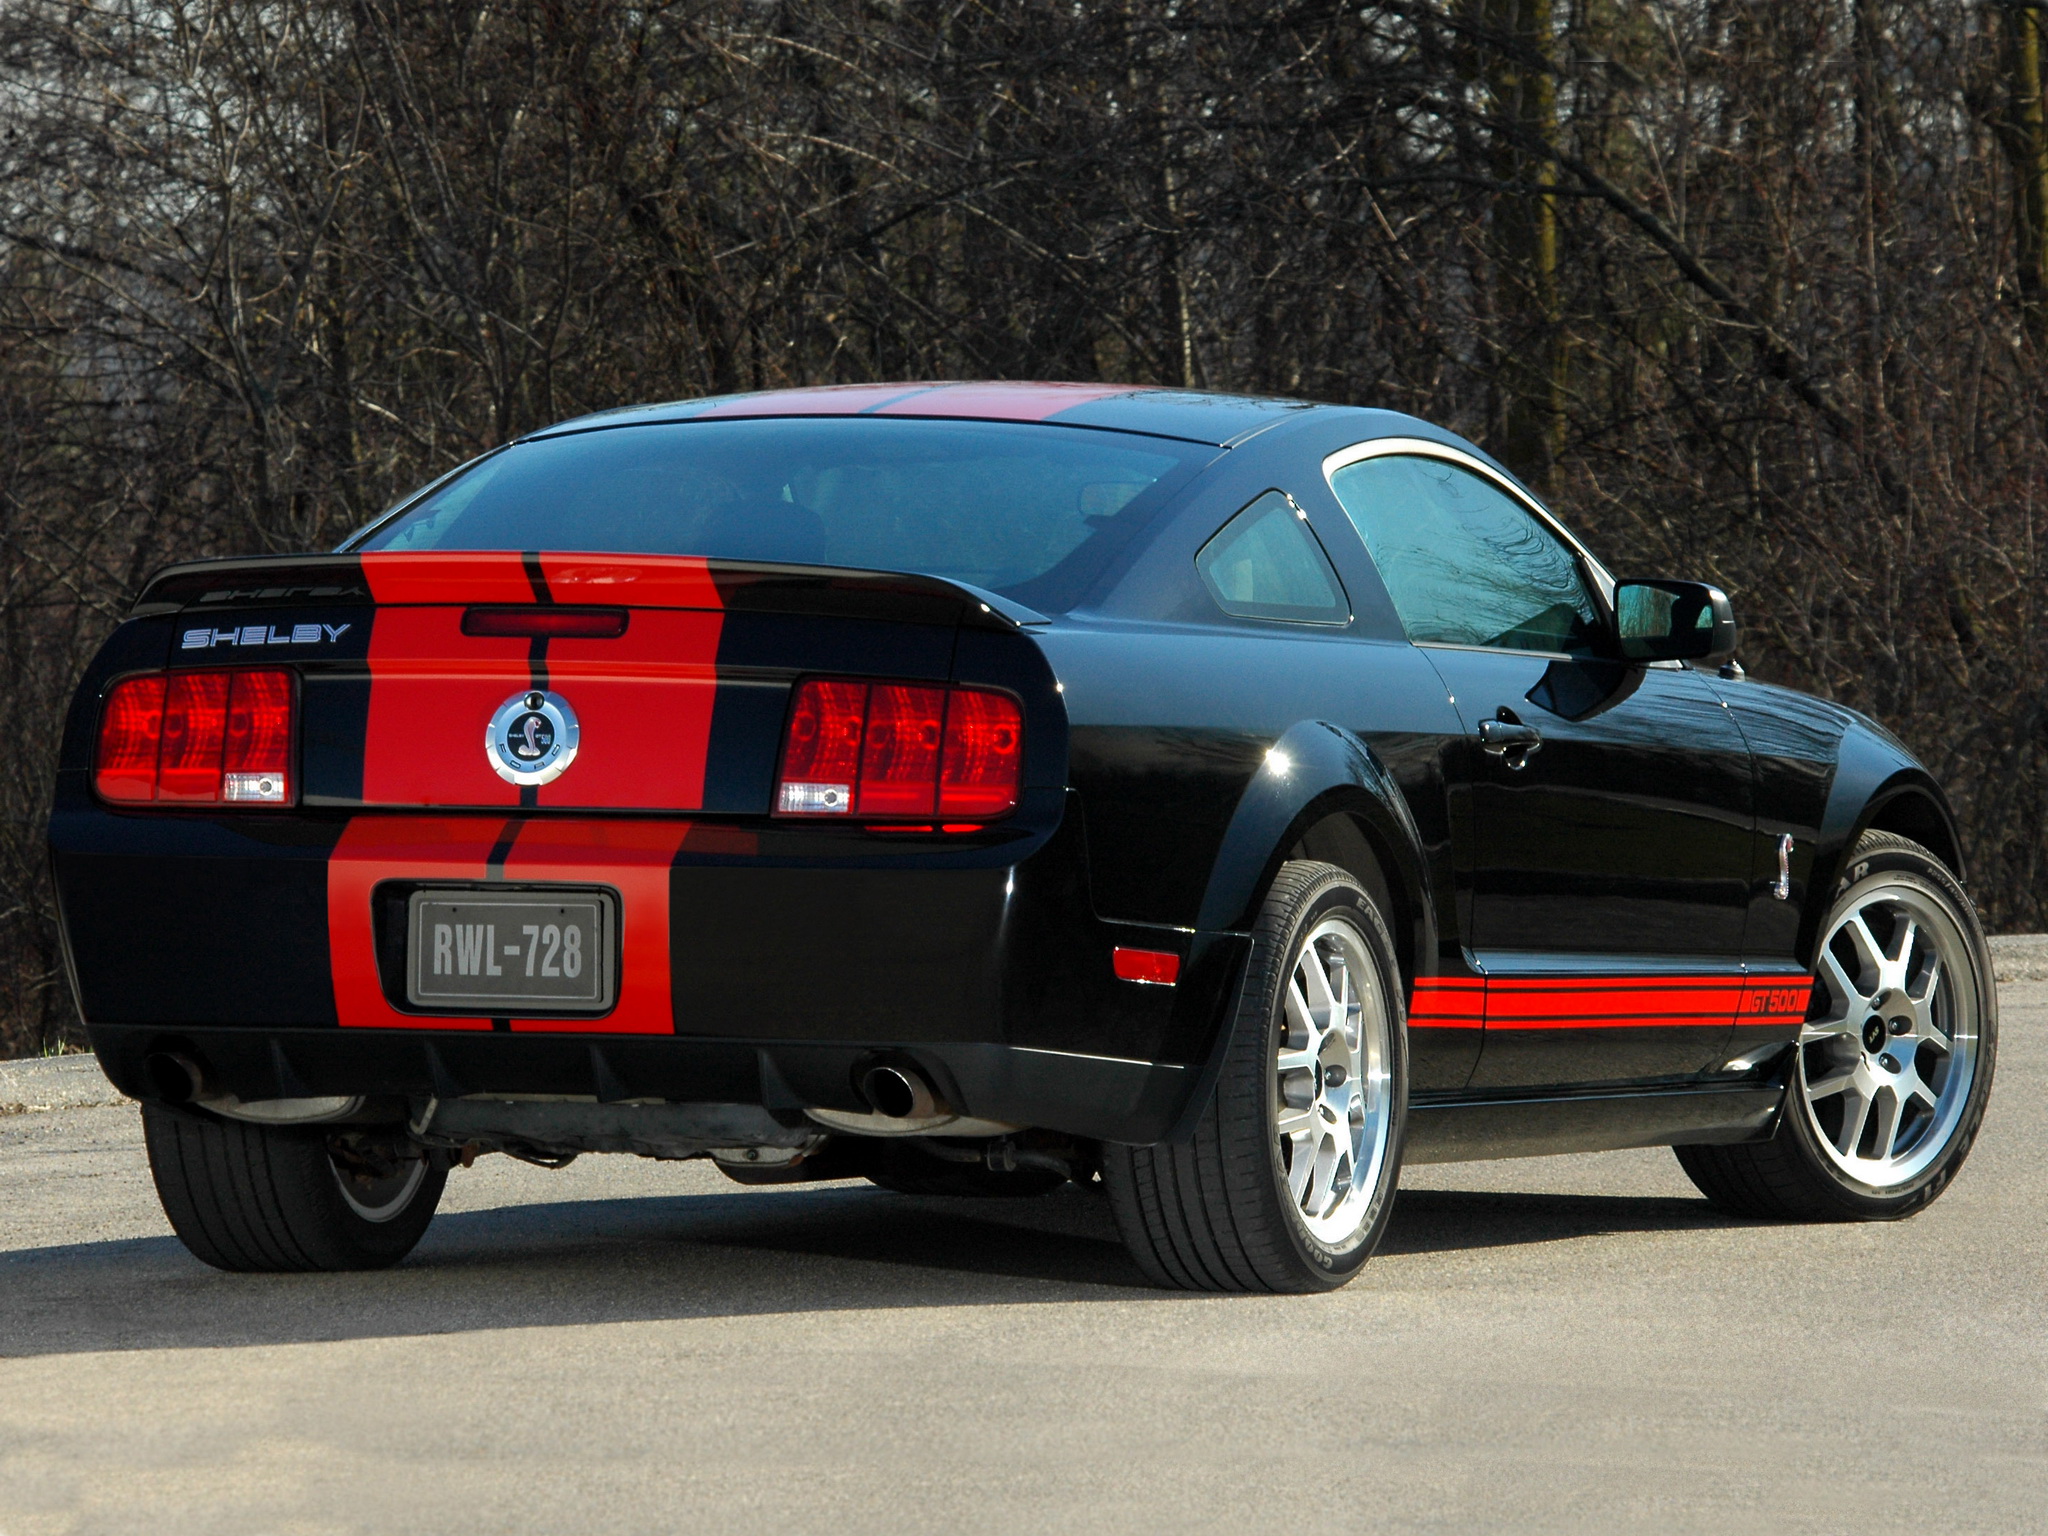 2007, Shelby, Gt500, Ford, Mustang, Muscle, Gd Wallpaper